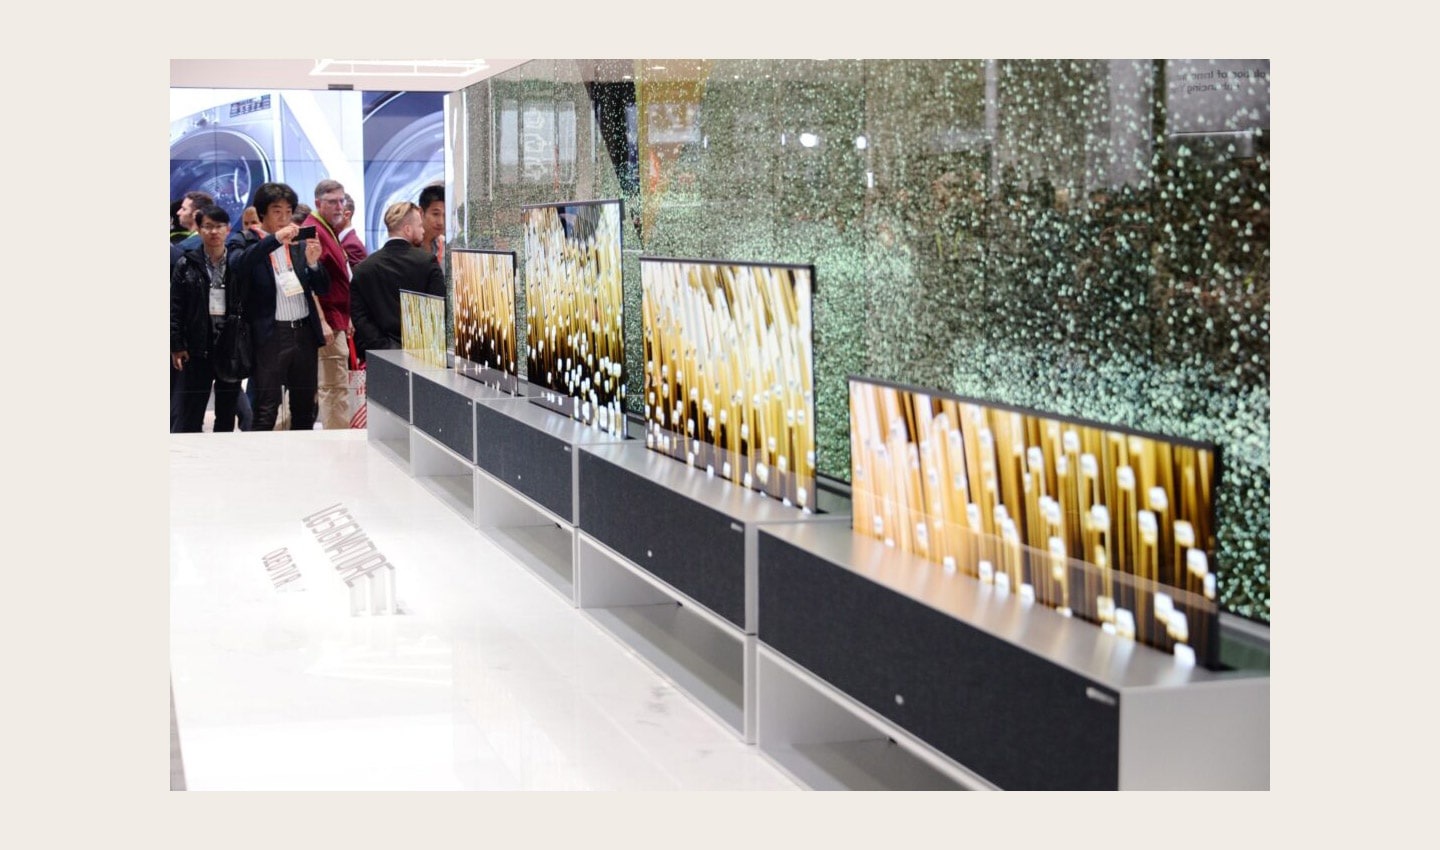 Closer view of LG SIGNATURE OLED TV R display zone with CES visitors viewing the display and taking pictures